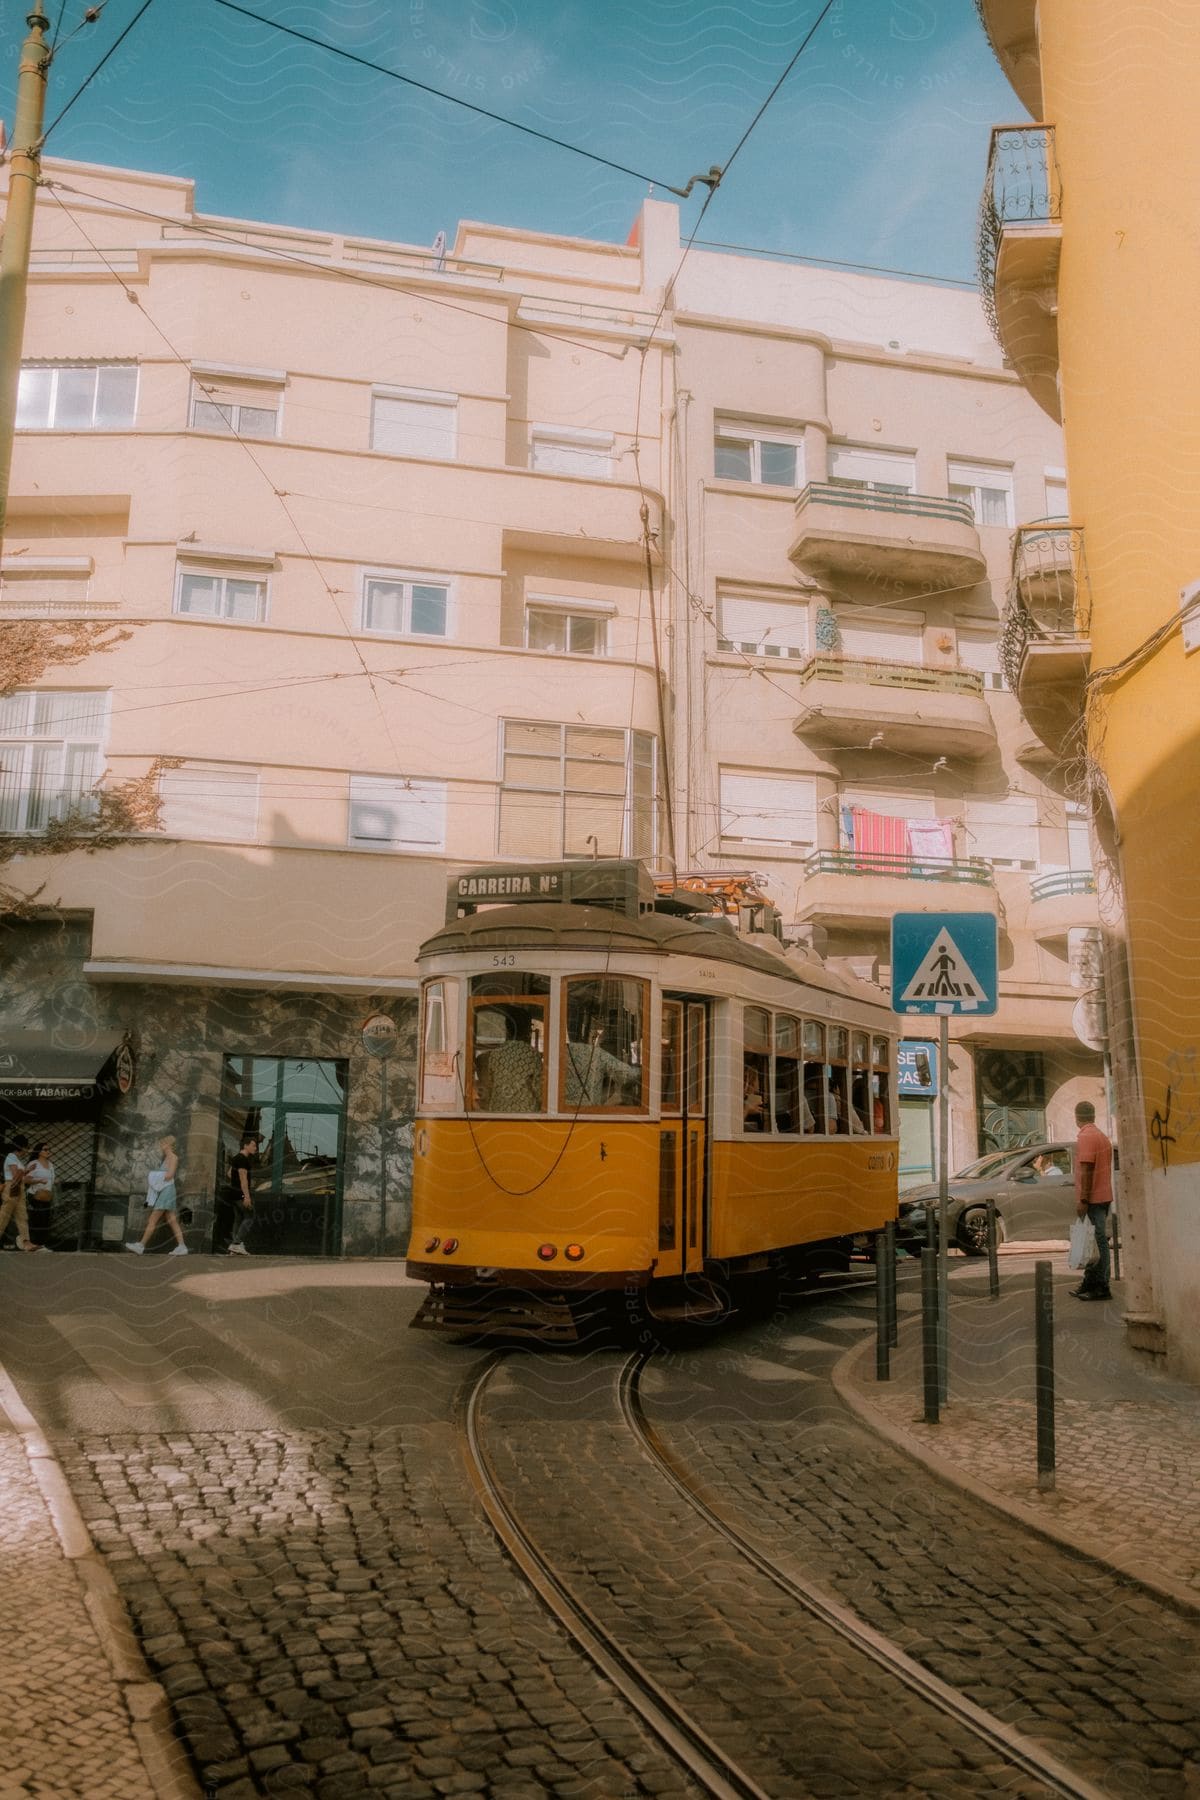 A yellow railcar is driving around the city with many people onboard